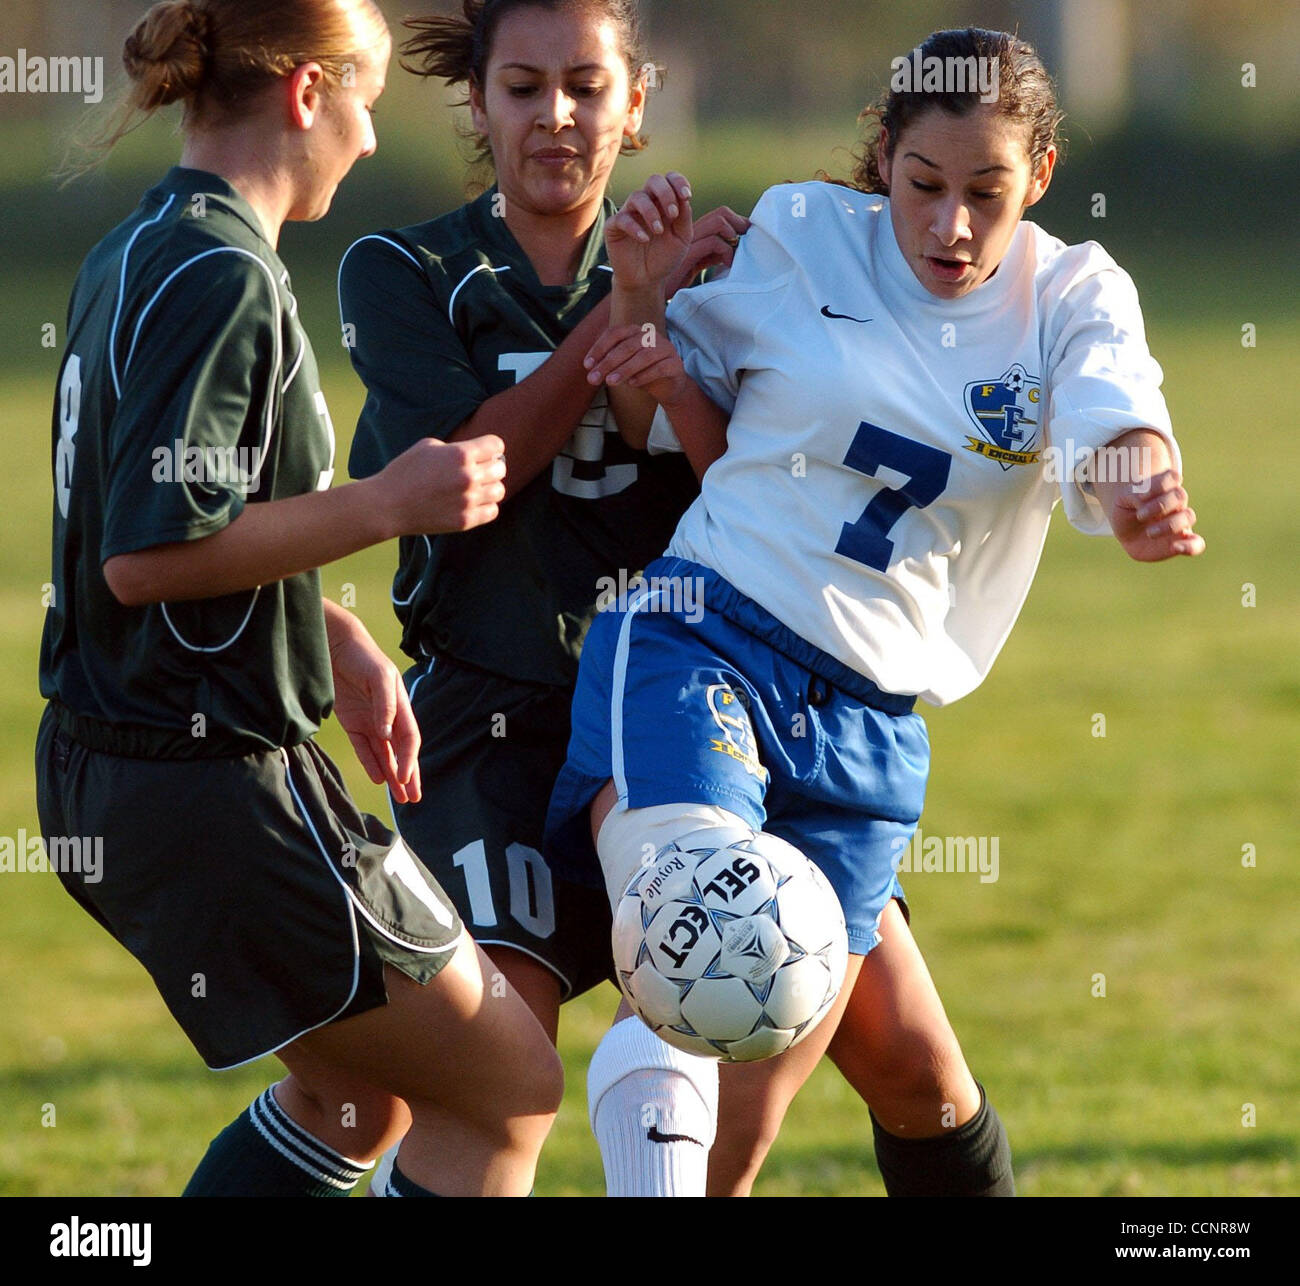 Francis Scarborough (right) of Encinal High tries to gain control of the  ball as Moreau Catholic High defenders converge upon her on Thursday  November 18, 2004 in Alameda, Calif. (Contra Costa Times/